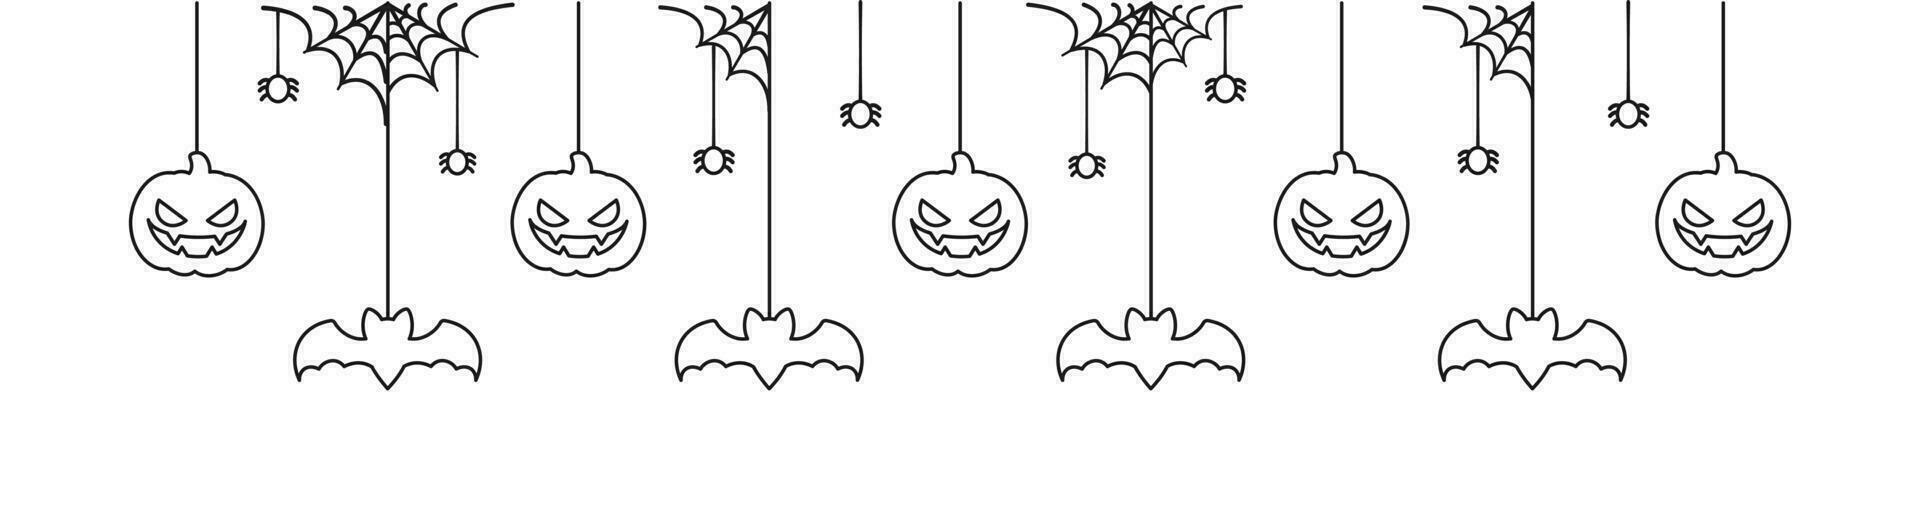 Happy Halloween banner or border with spider web, bats and jack o lantern pumpkins outline doodle. Hanging Spooky Ornaments Decoration Vector illustration, trick or treat party invitation